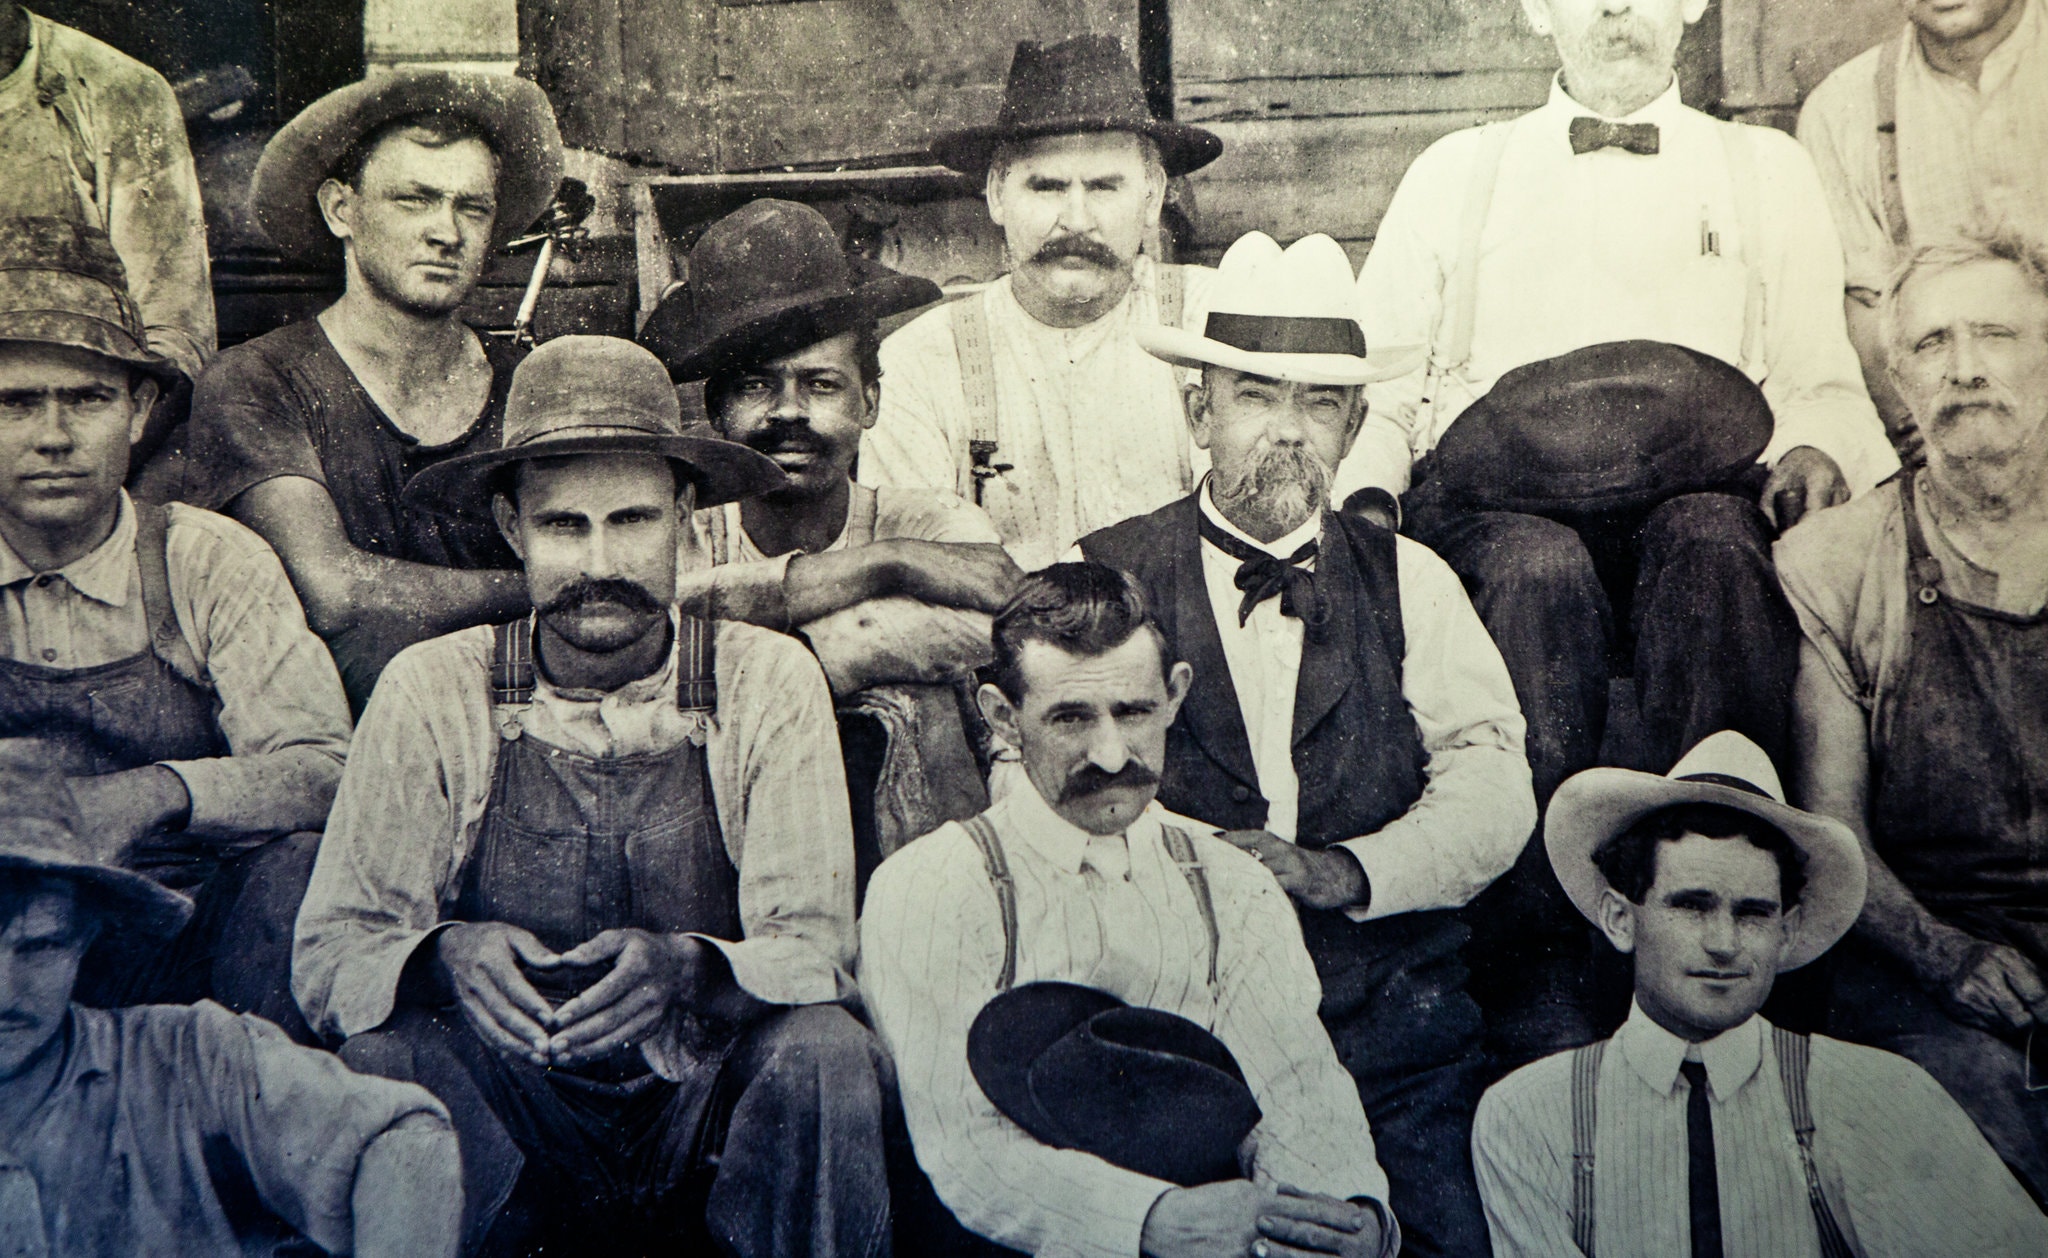 Historic image of Jack Daniel seated next to George Green, the son of Nathan "Nearest" Green, the man who taught Jack Daniel how to make whiskey.. 1870. Unknown author, Public domain, via Wikimedia Commons